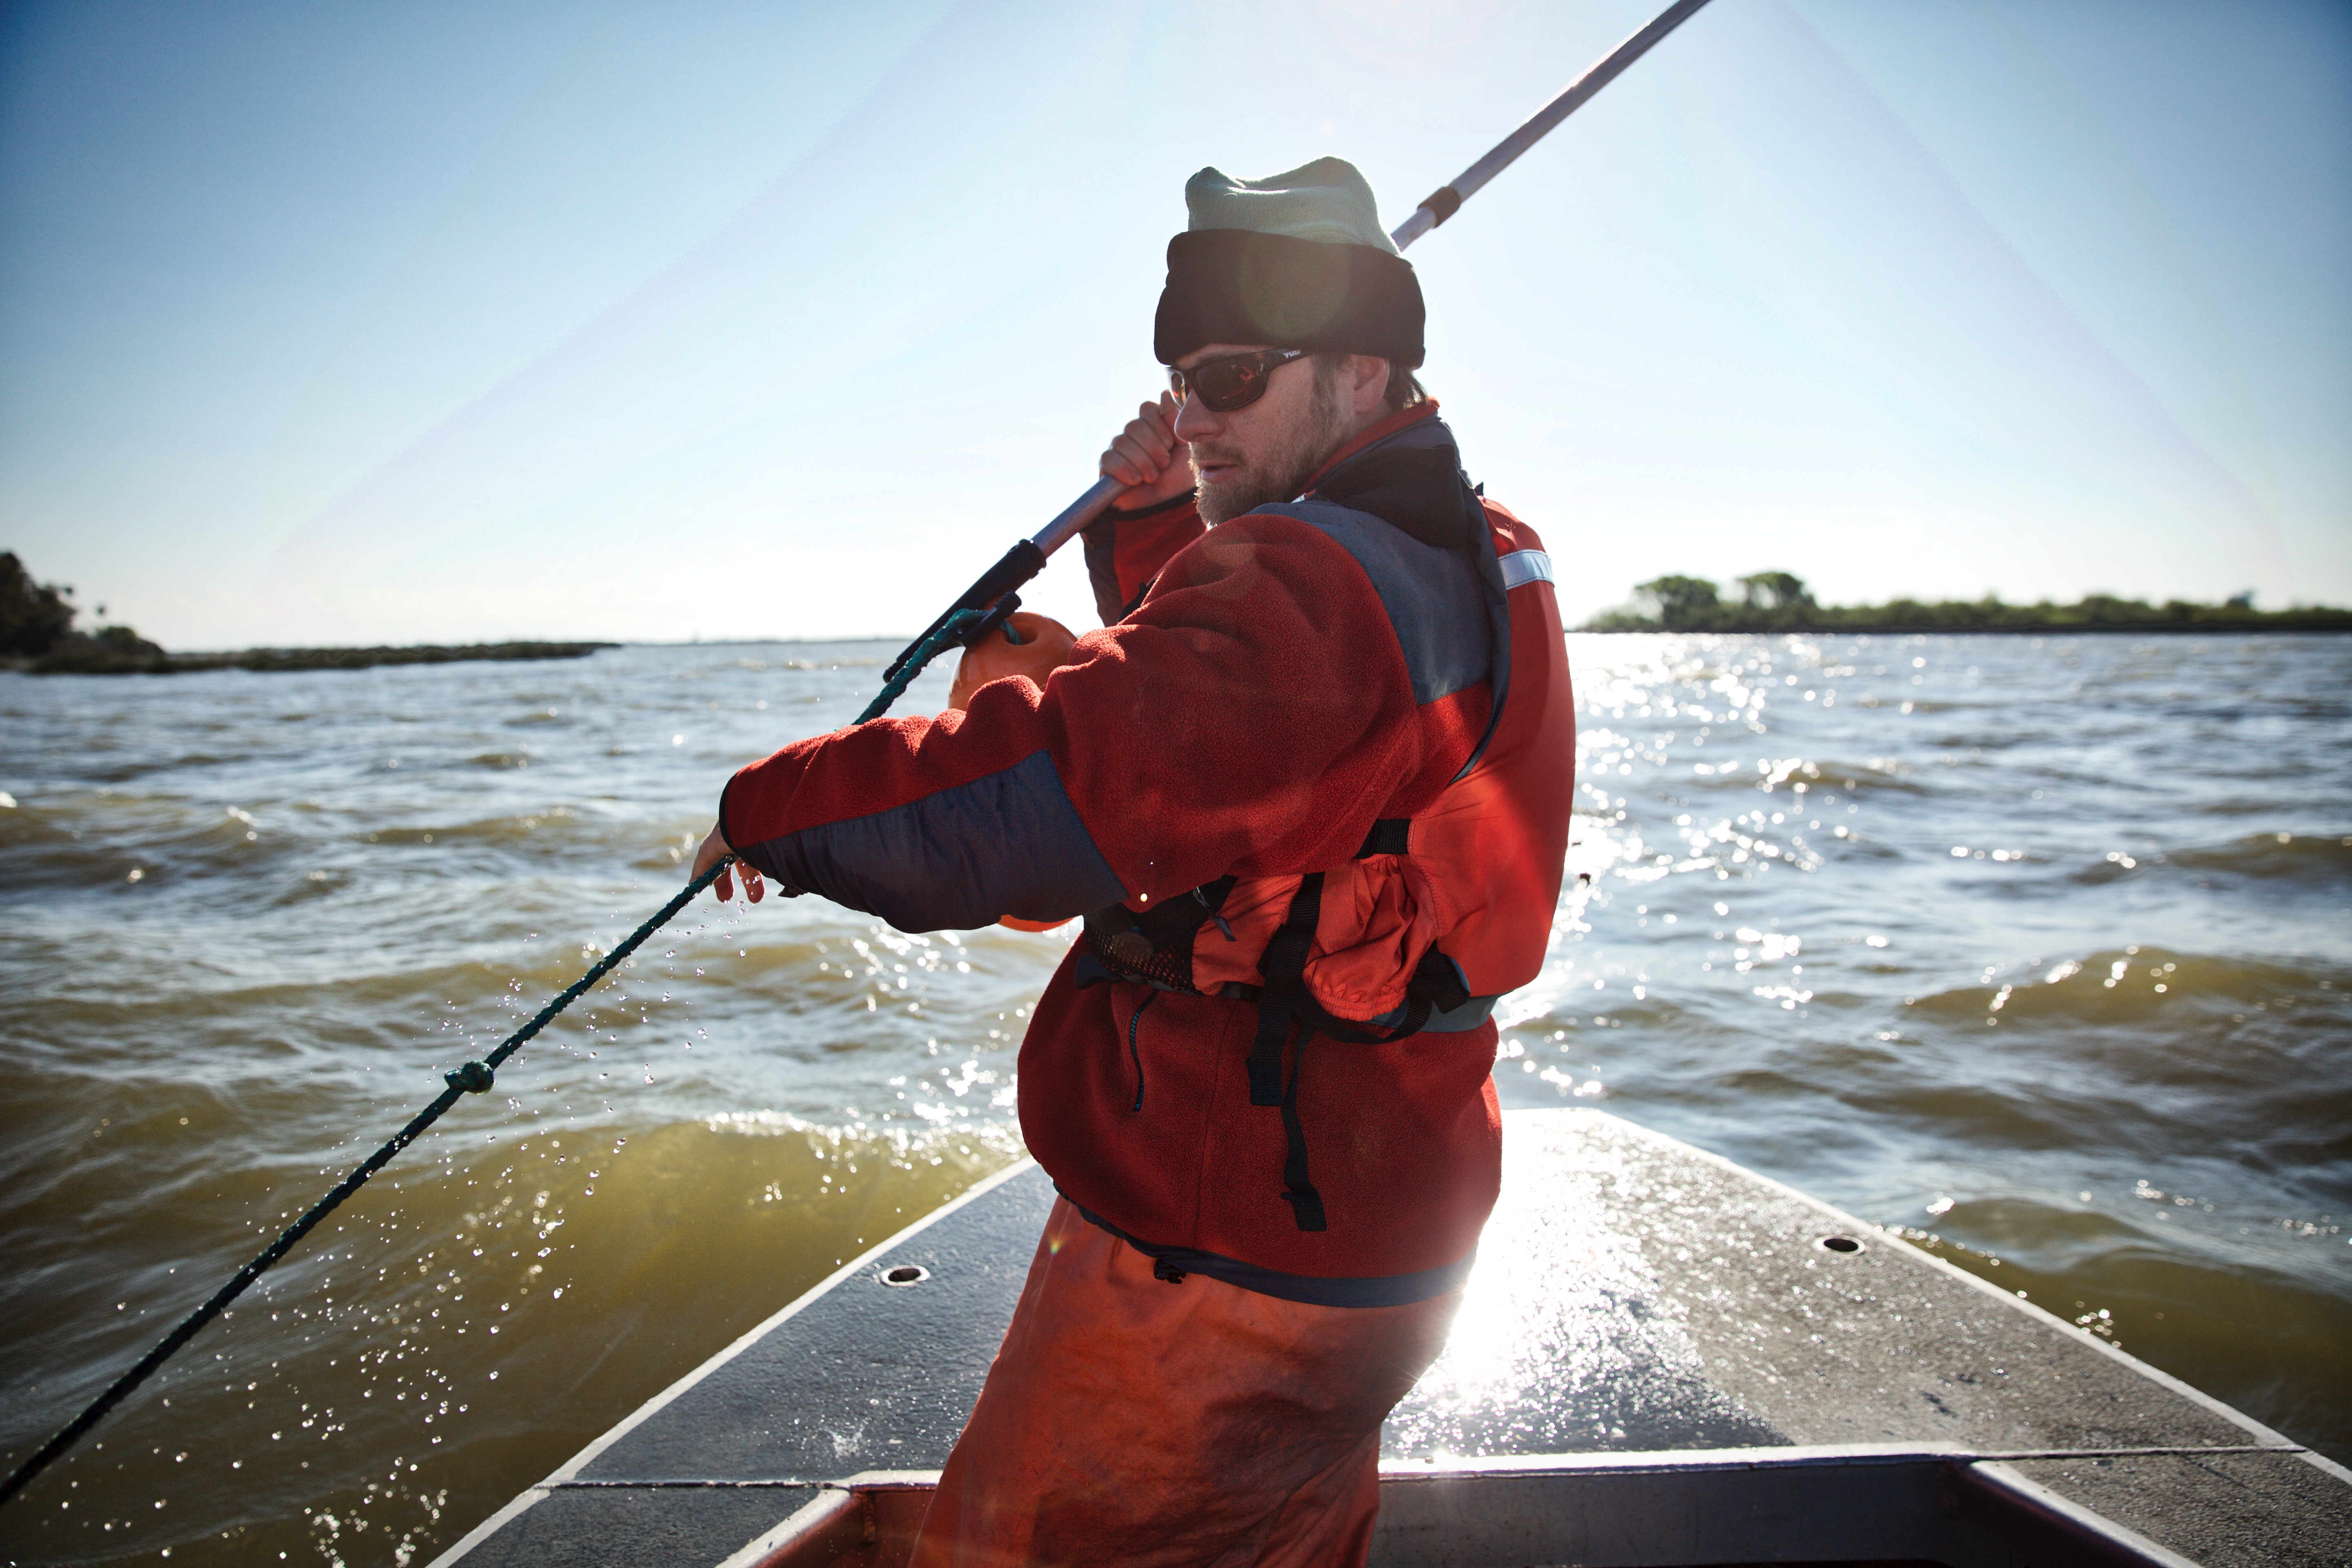 A man on a boat uses a pole to pull in the line of a trawl net